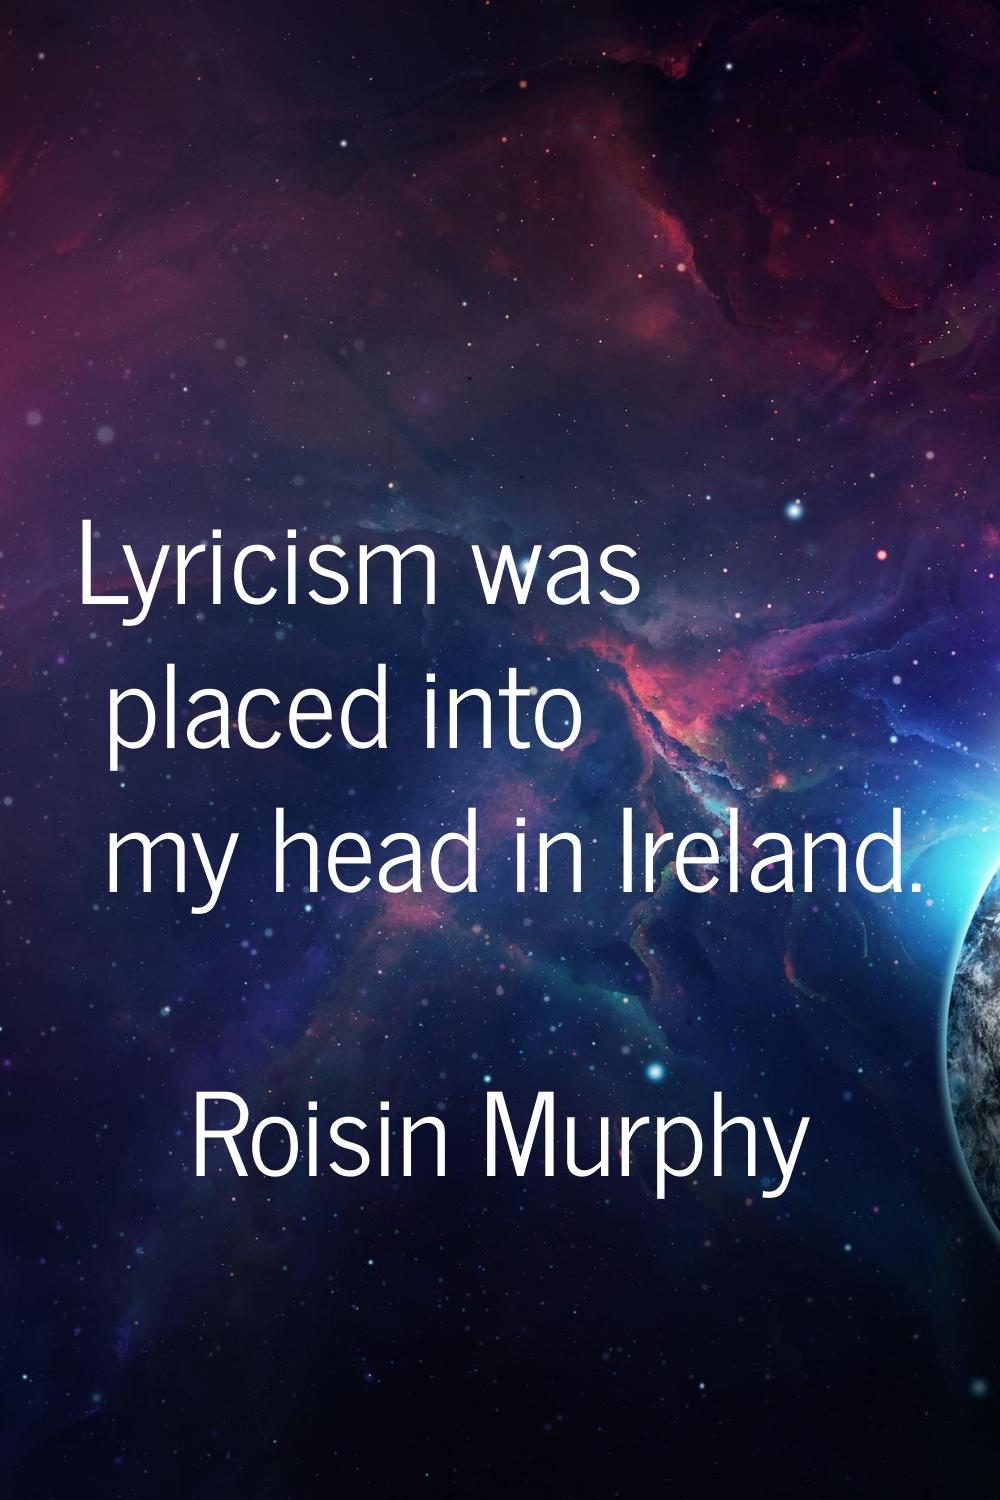 Lyricism was placed into my head in Ireland.